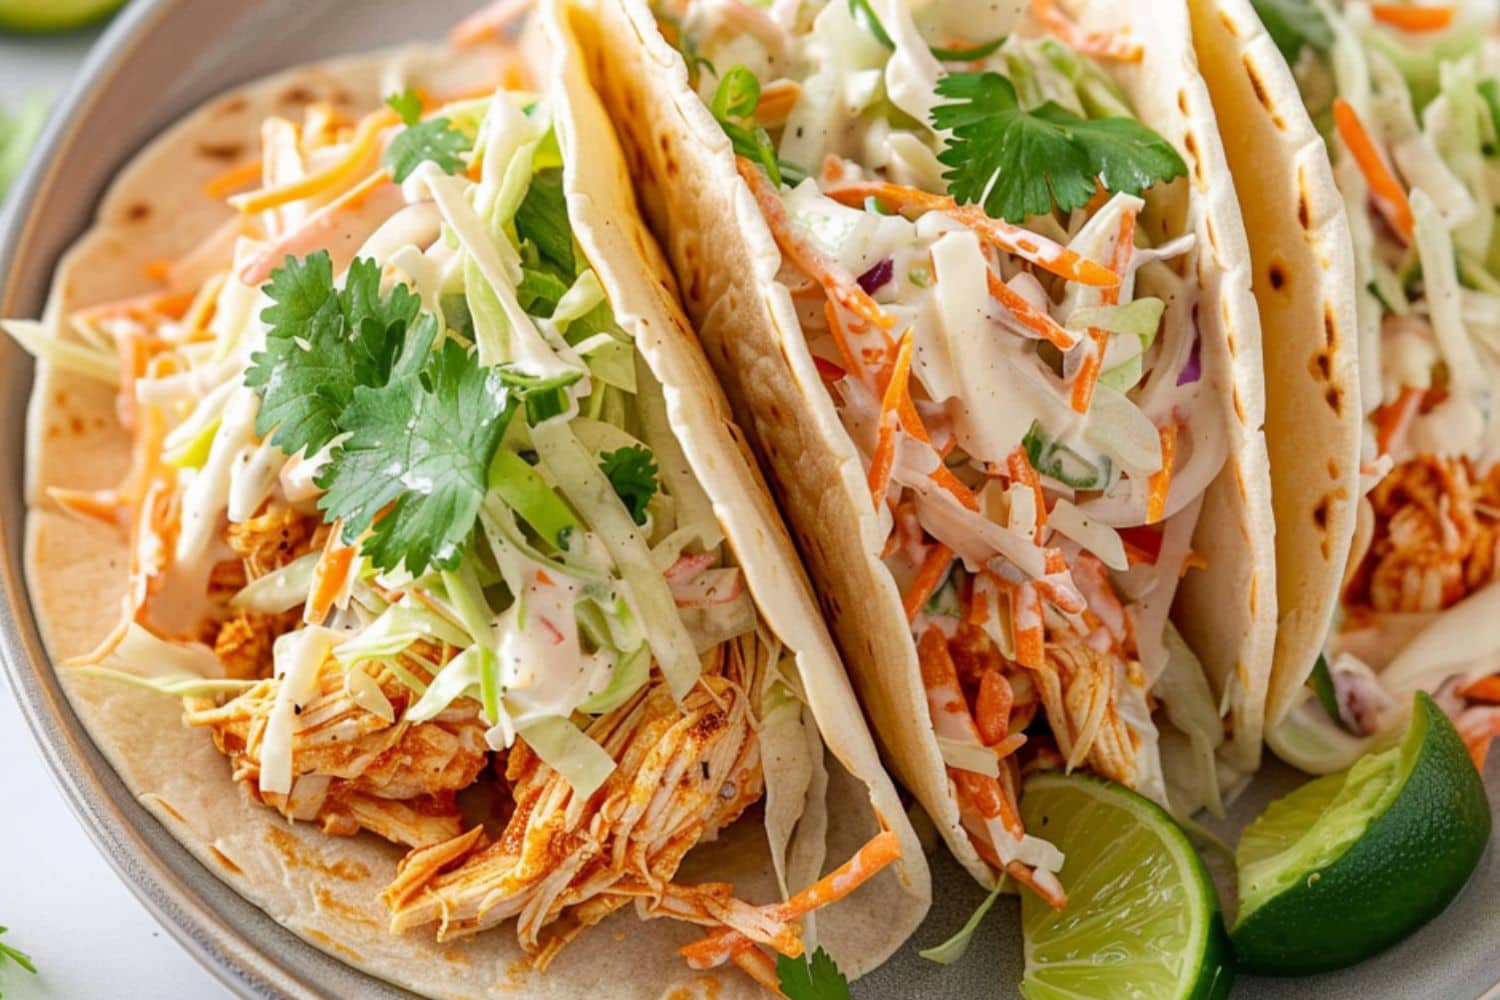 Chicken tacos with shredded buffalo flavored chicken topped with shredded lettuce and carrots in ranch dressing served on a white plate.